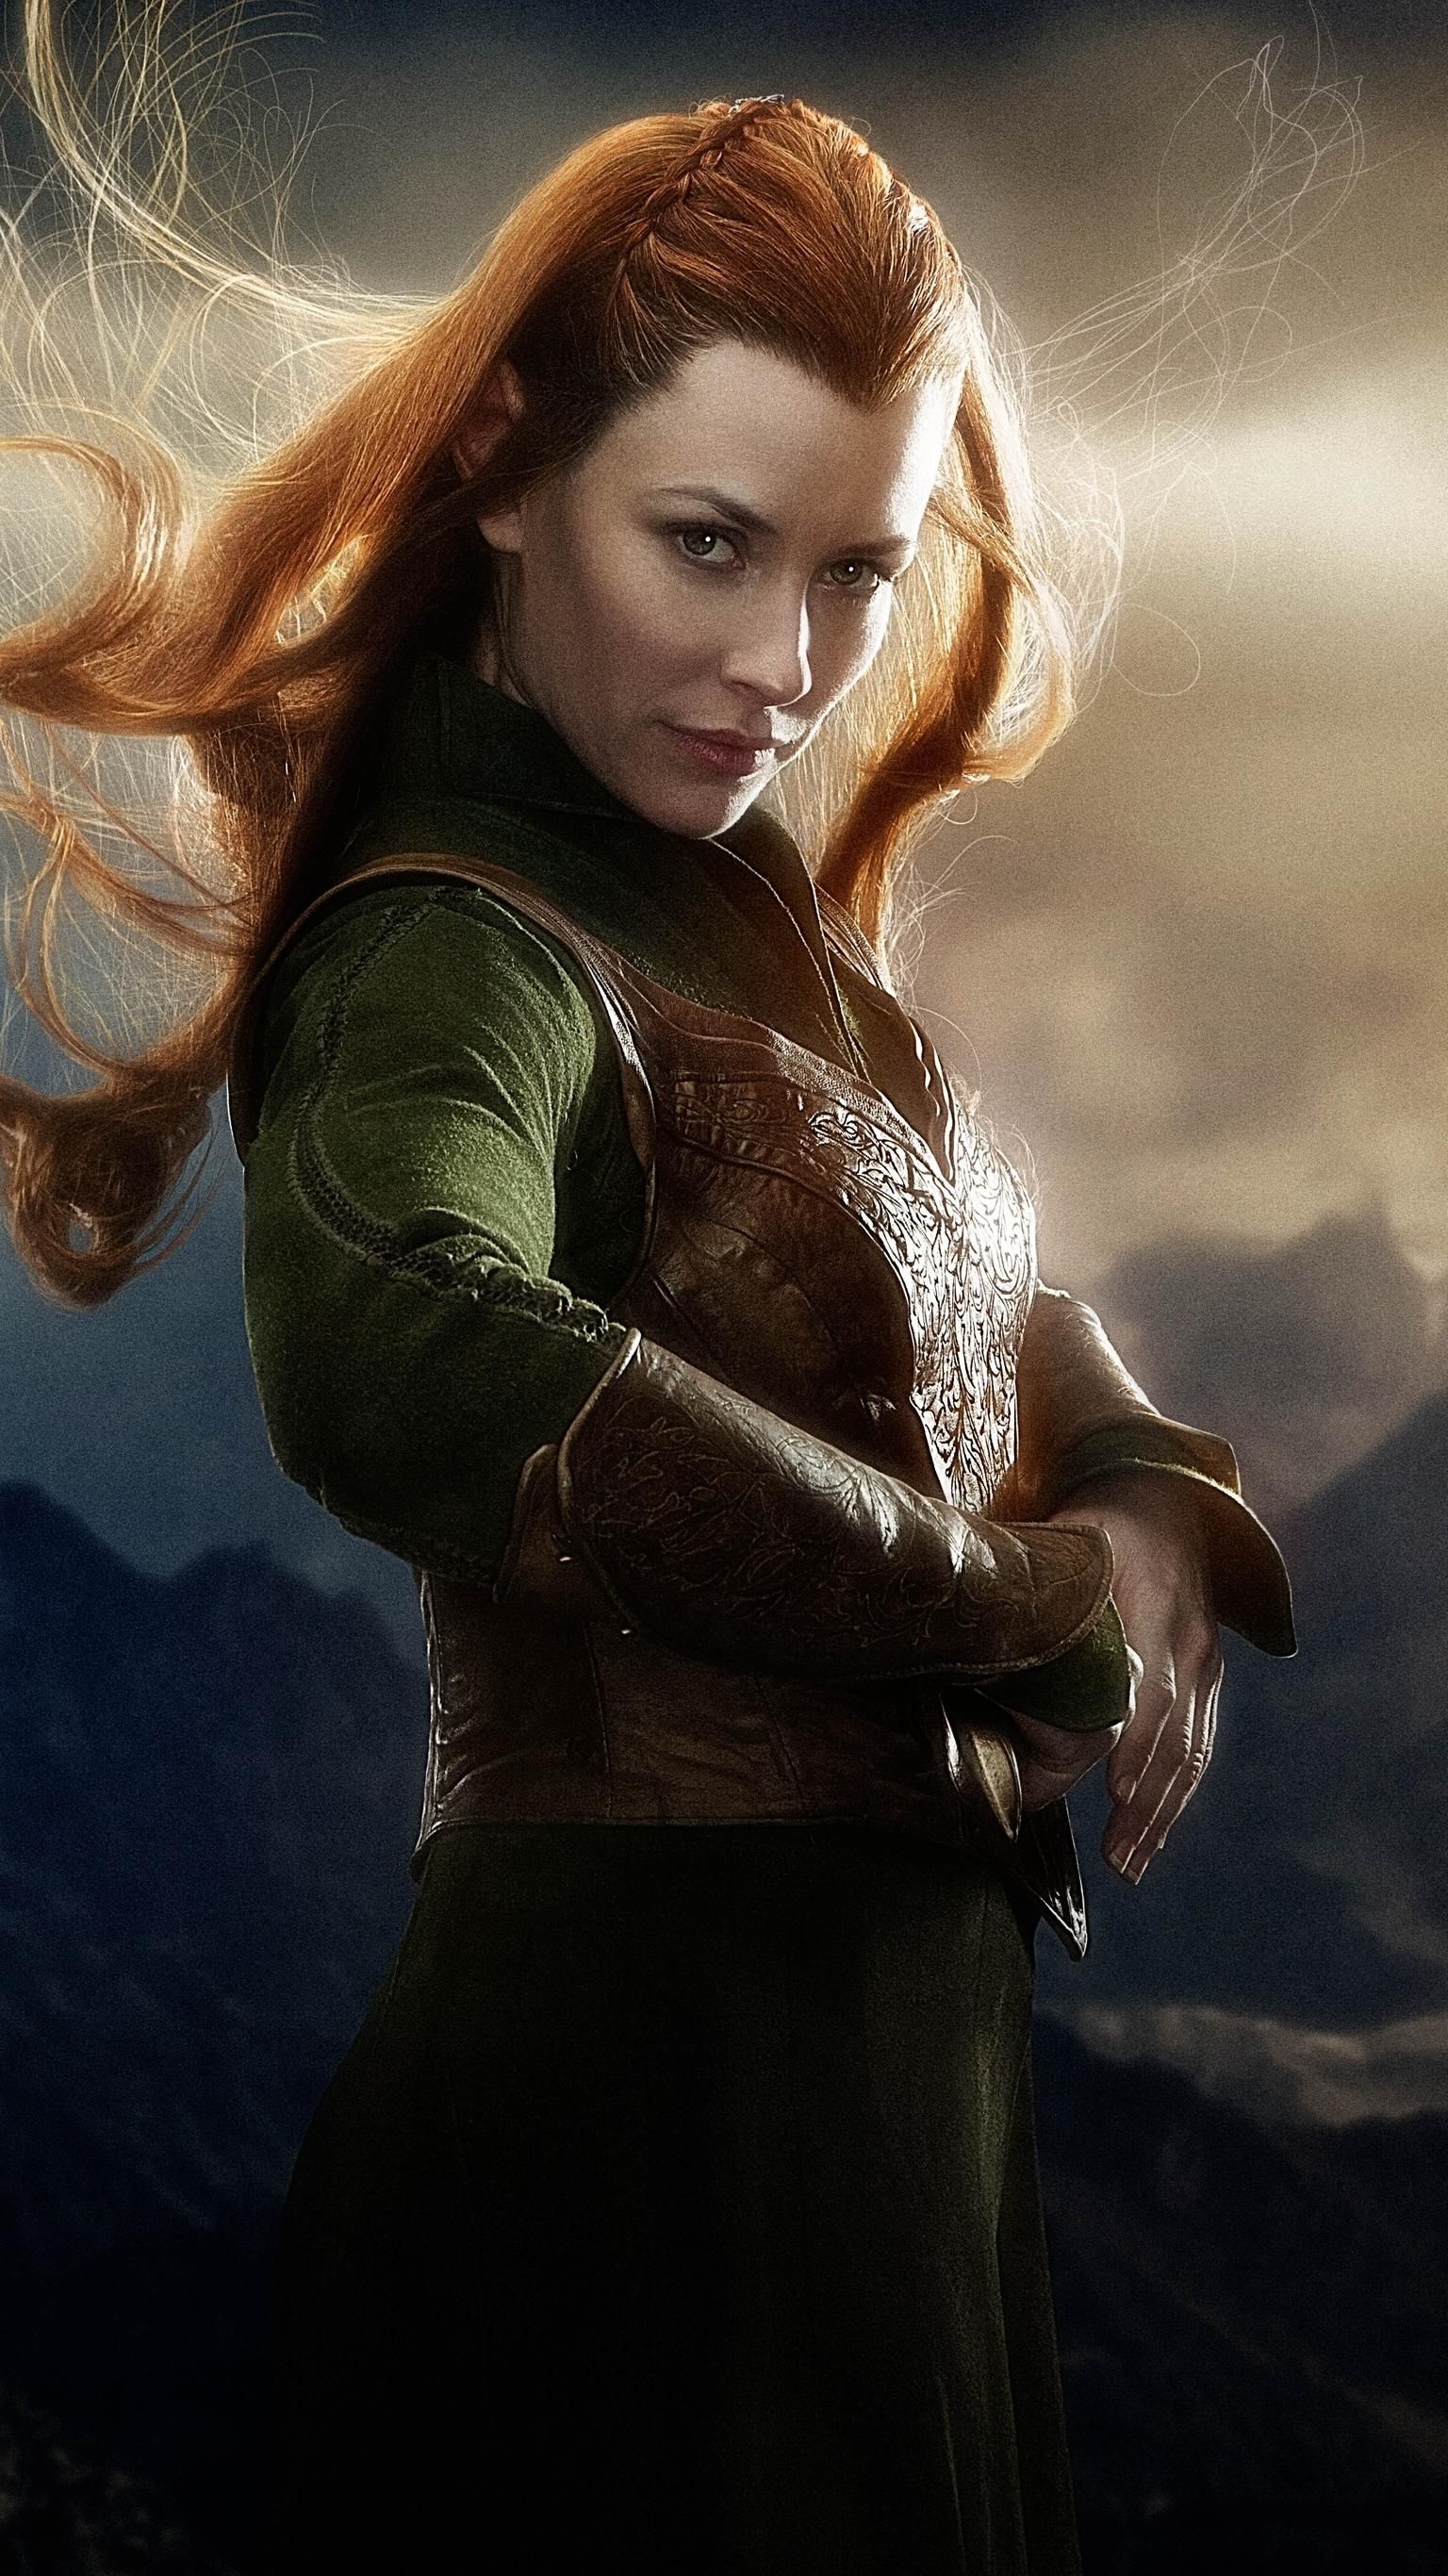 Phone wallpaper, Desolation of Smaug, Tauriel the Elf, Love story, 1540x2740 HD Phone